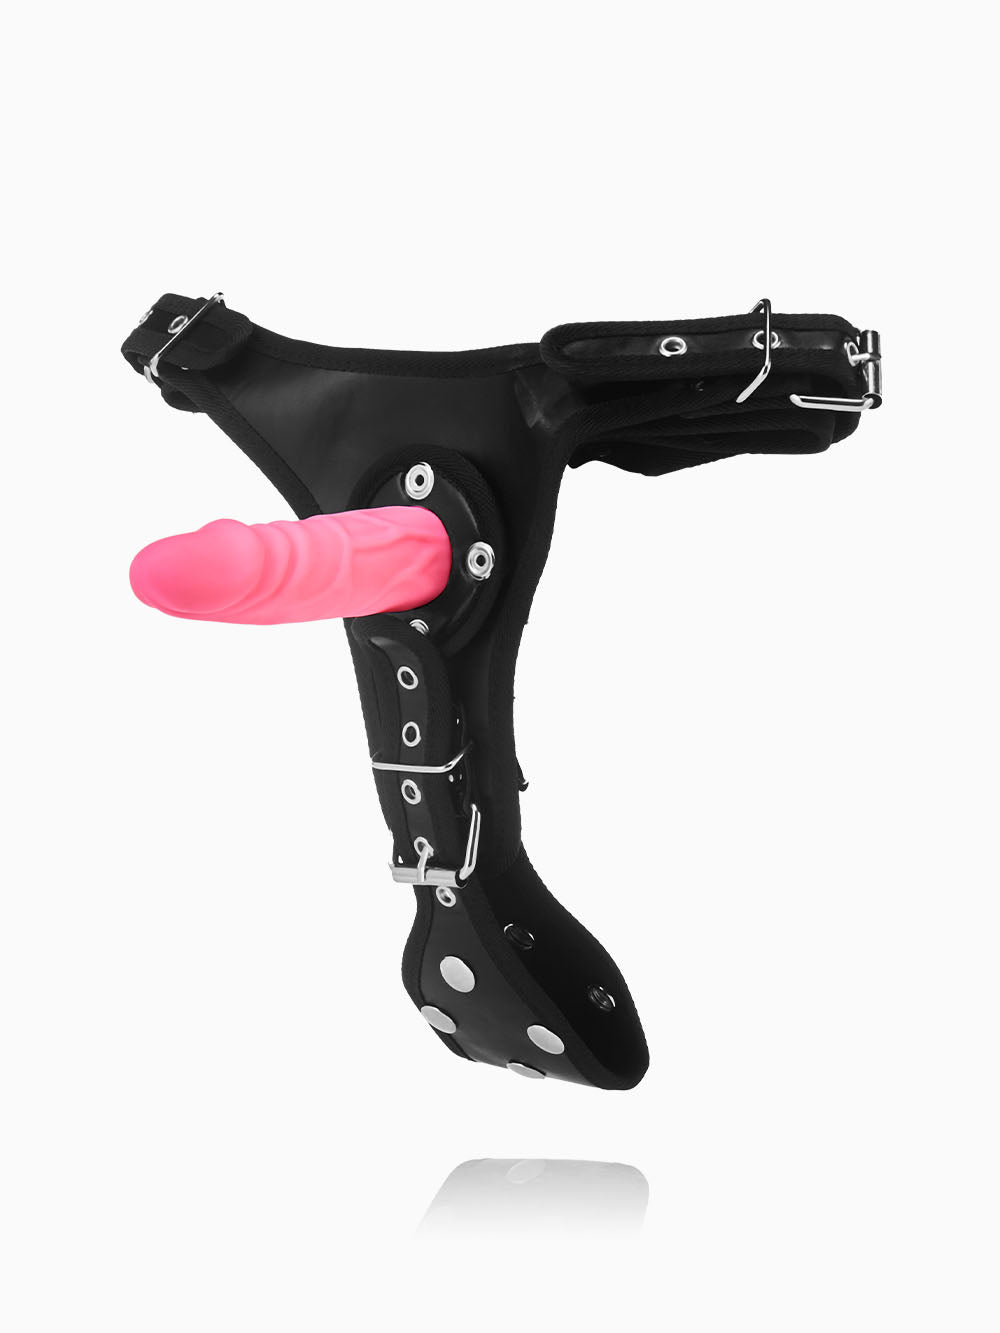 Pillow Talk Strap On Harness and Dildos - Black/Pink